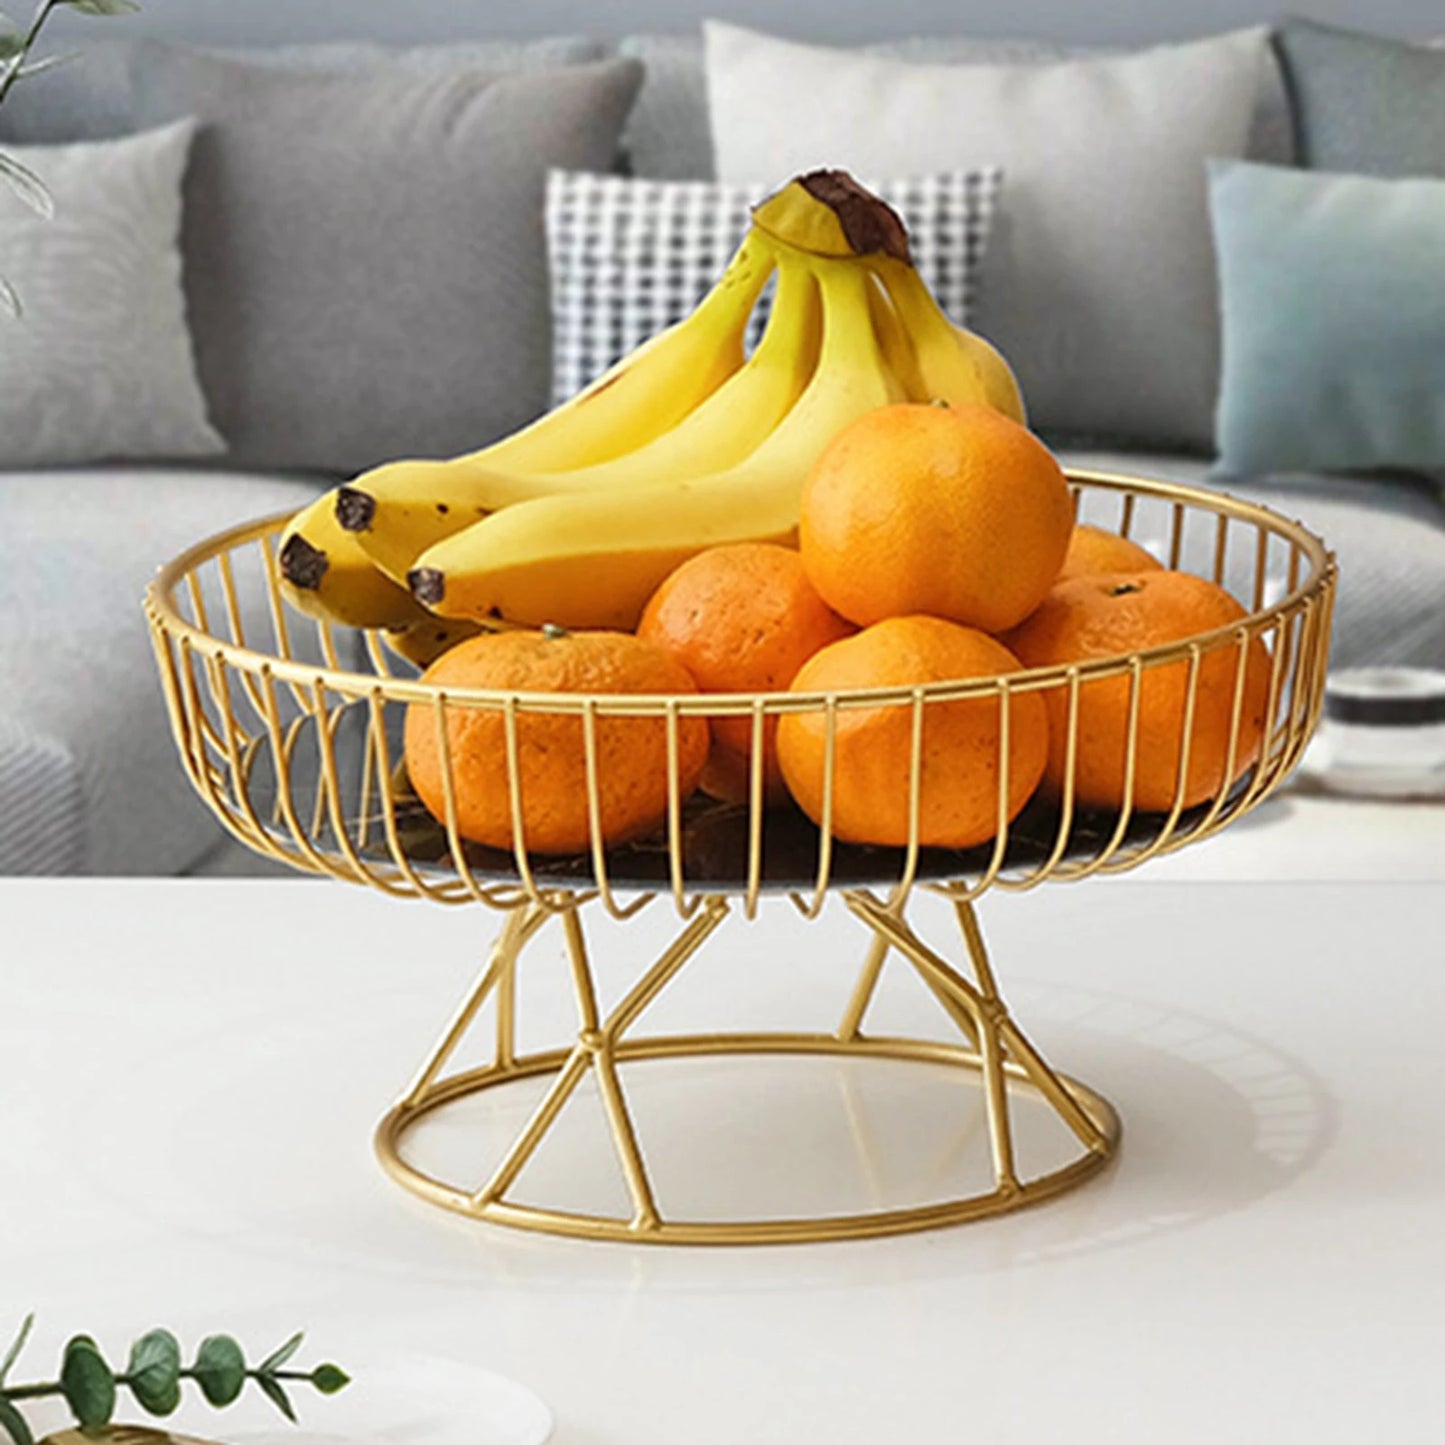 Tabletop Golden Metal Iron Wire Fruit Stand Dish Serving Bowl Container